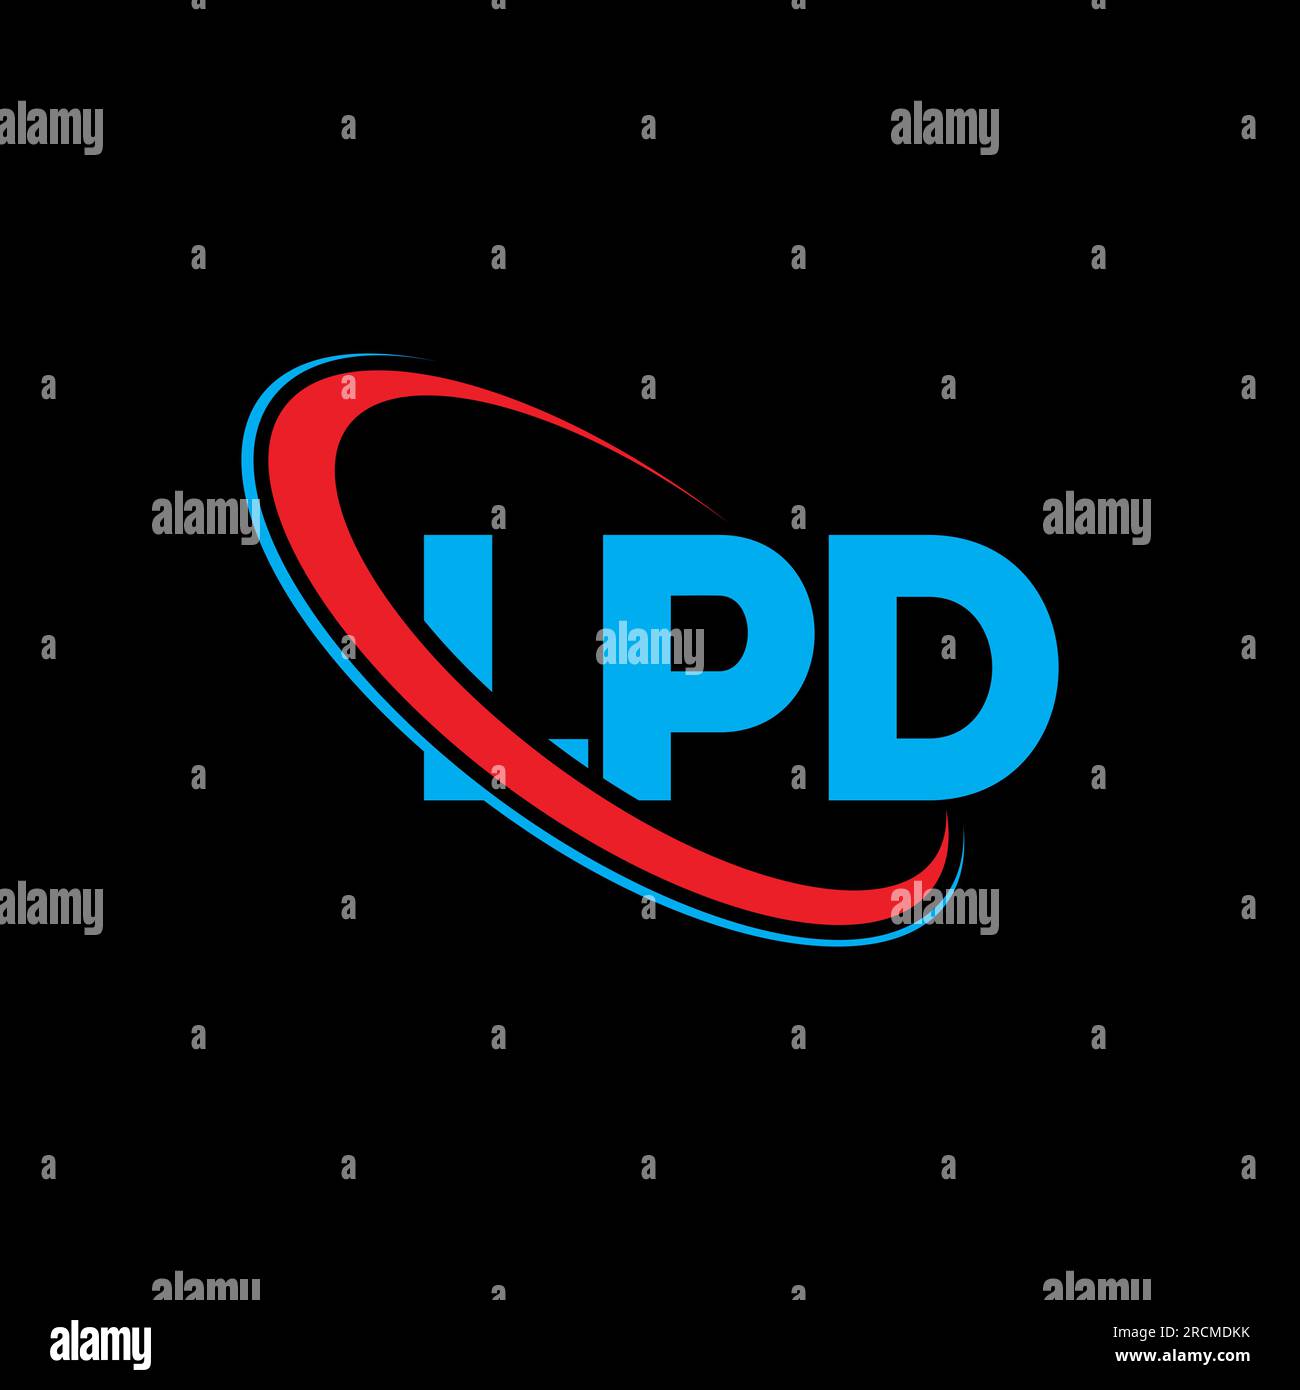 LPD logo. LPD letter. LPD letter logo design. Initials LPD logo linked with circle and uppercase monogram logo. LPD typography for technology, busines Stock Vector